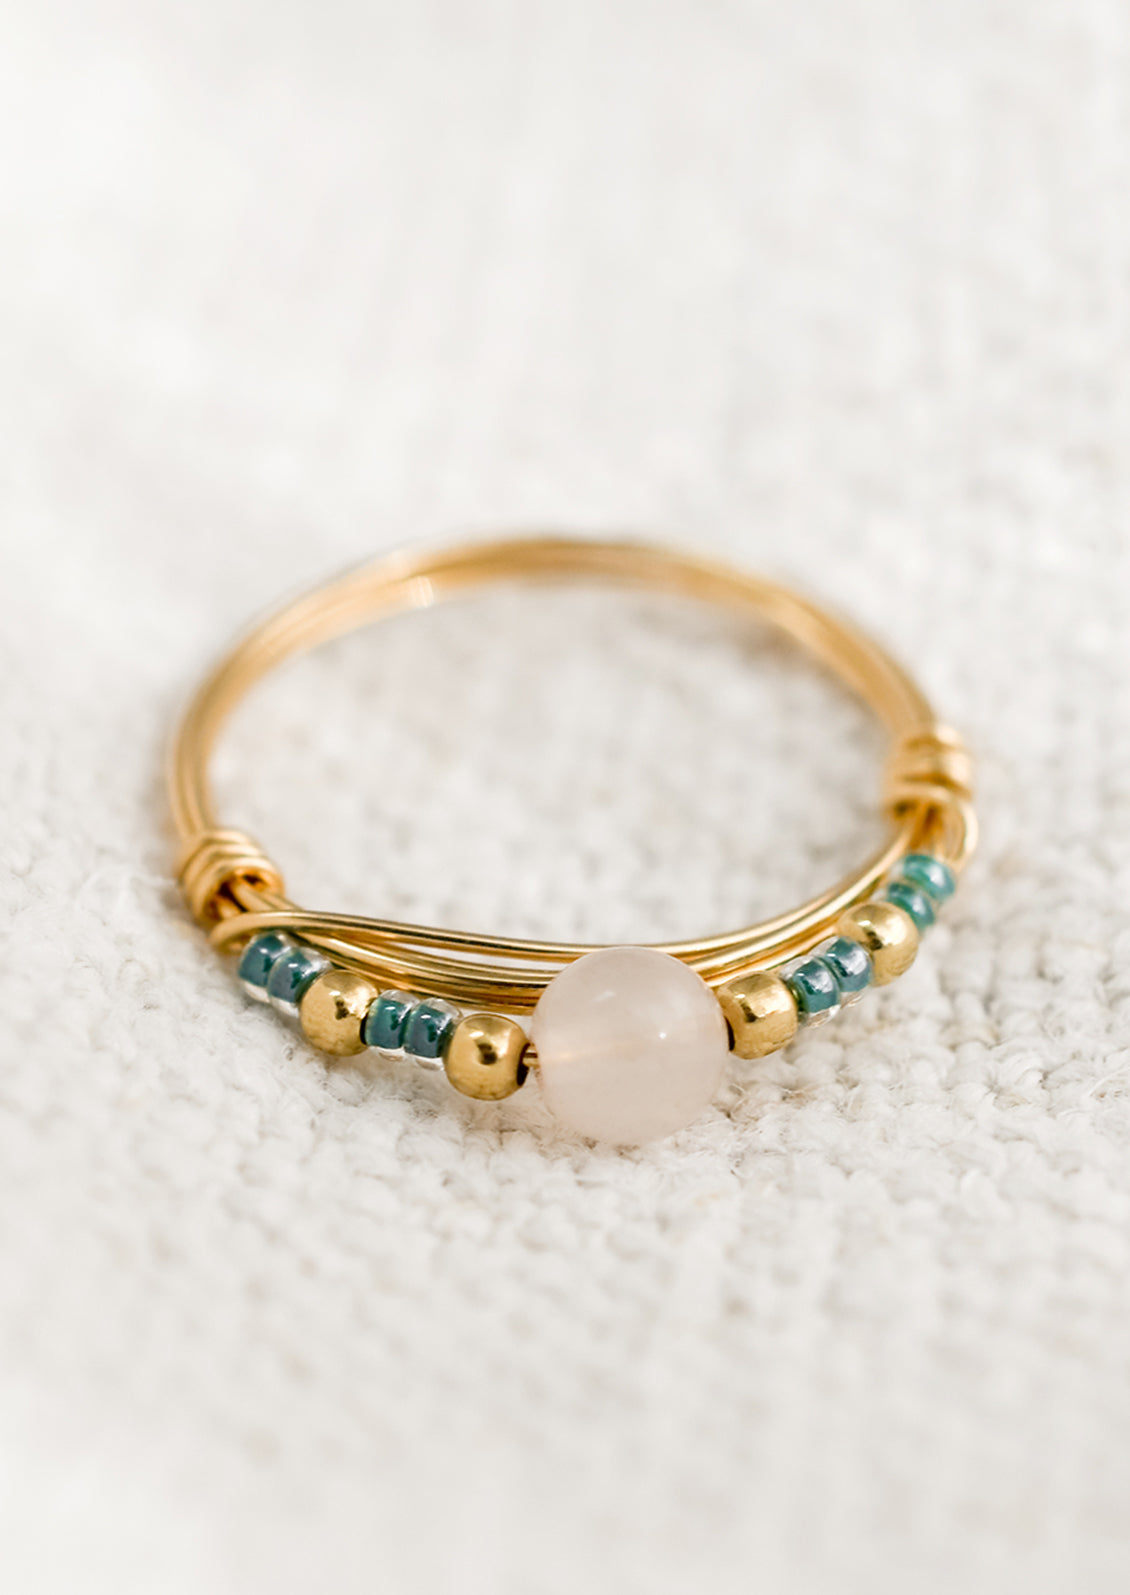 A gold wire ring with blue and pink beads.